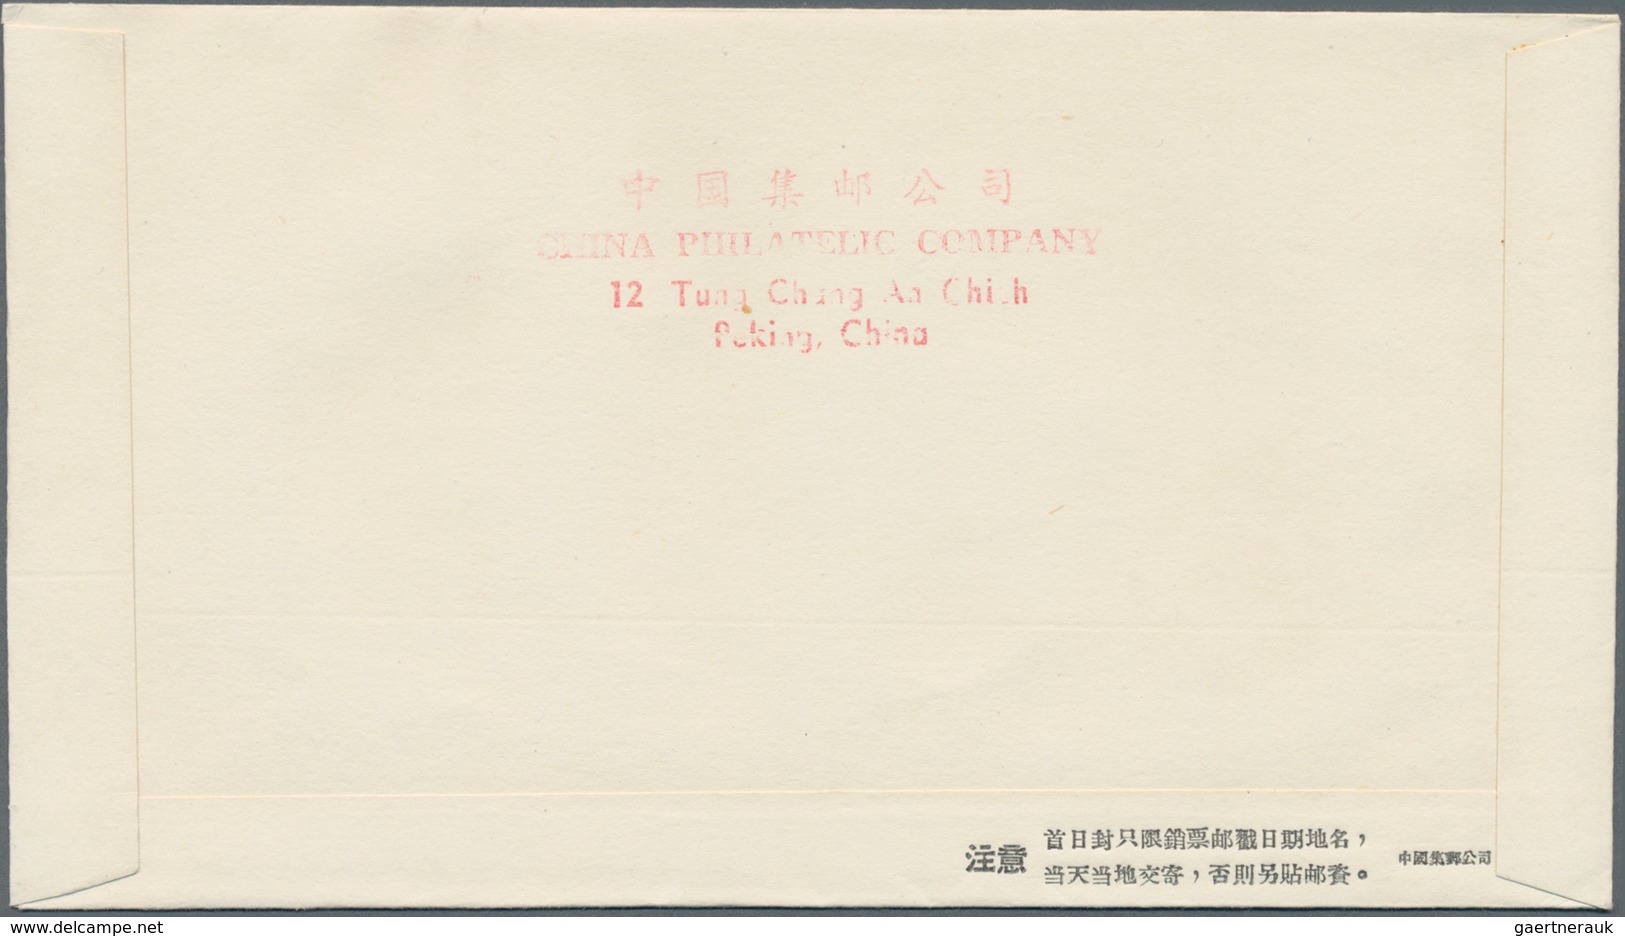 China - Volksrepublik: 1959, 8 First Day covers of C674, C67, C68, C69, C70, C73, and S36, bearing t